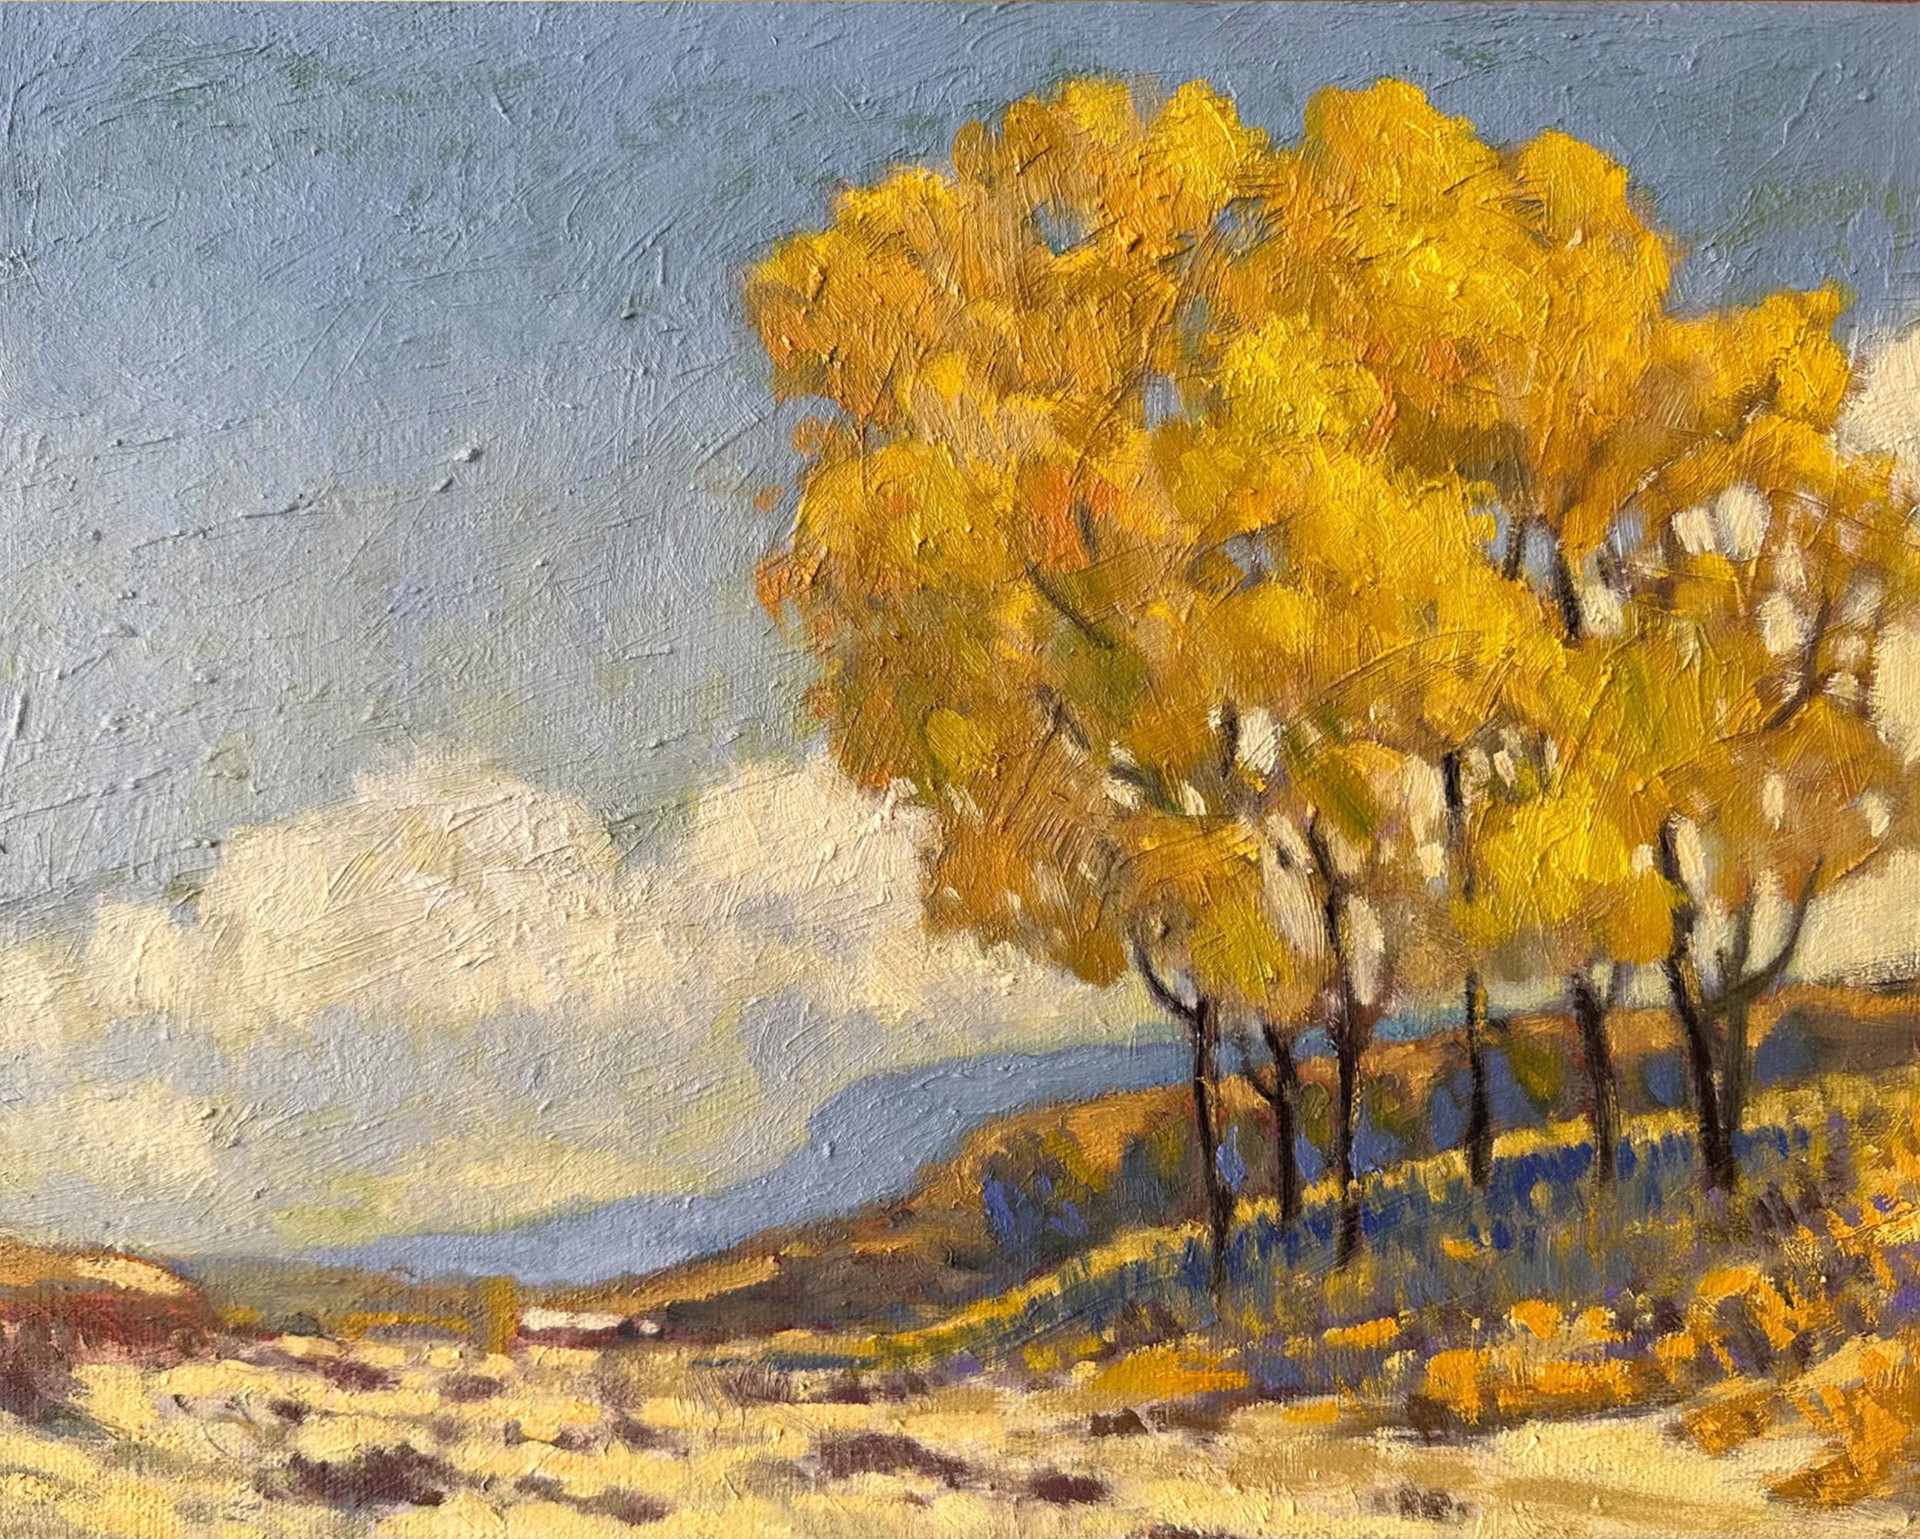 Cottonwoods Over an Arroyo by Kenneth Green